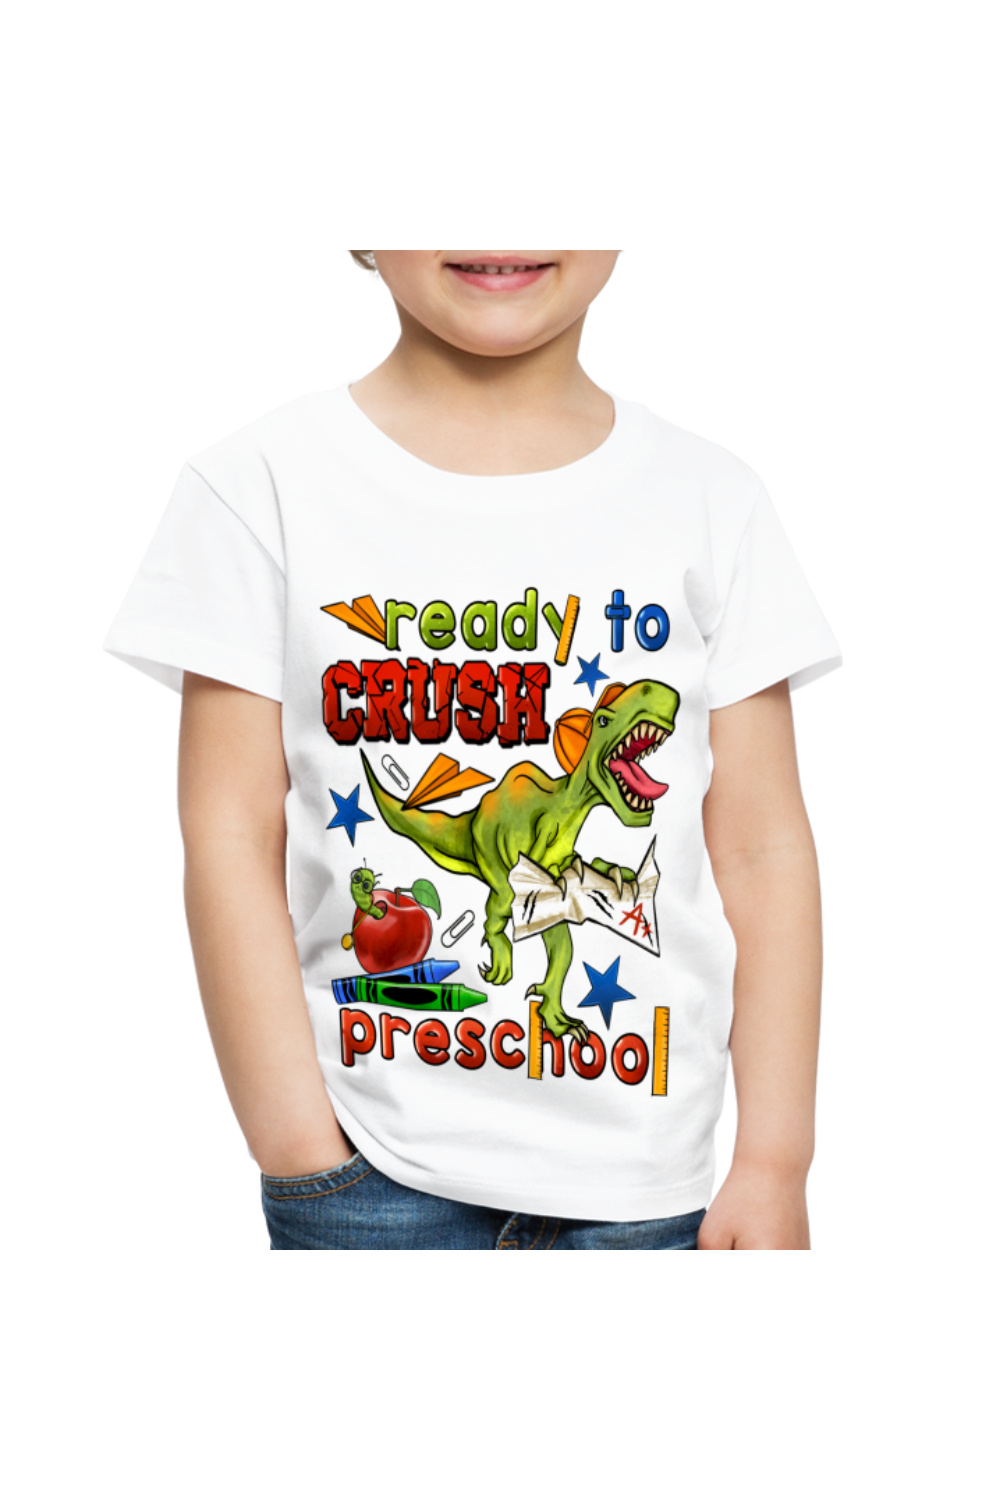 Toddler Boys Ready To Crush Preschool Short Sleeve Tee Shirt for Back To School - white - NicholesGifts.online